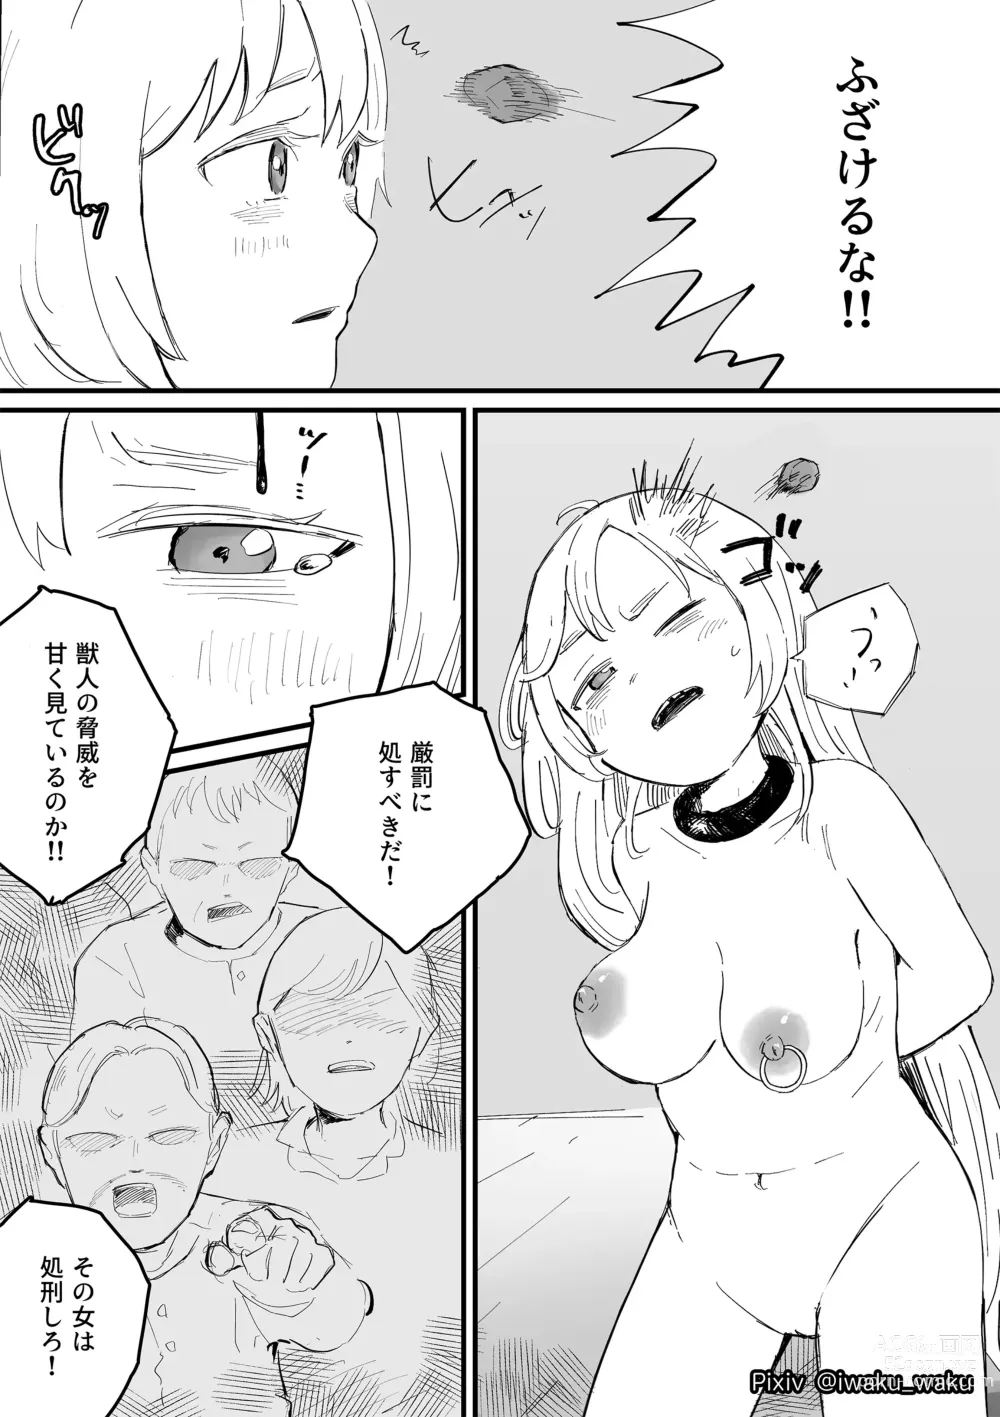 Page 2 of doujinshi Punishment for Elena